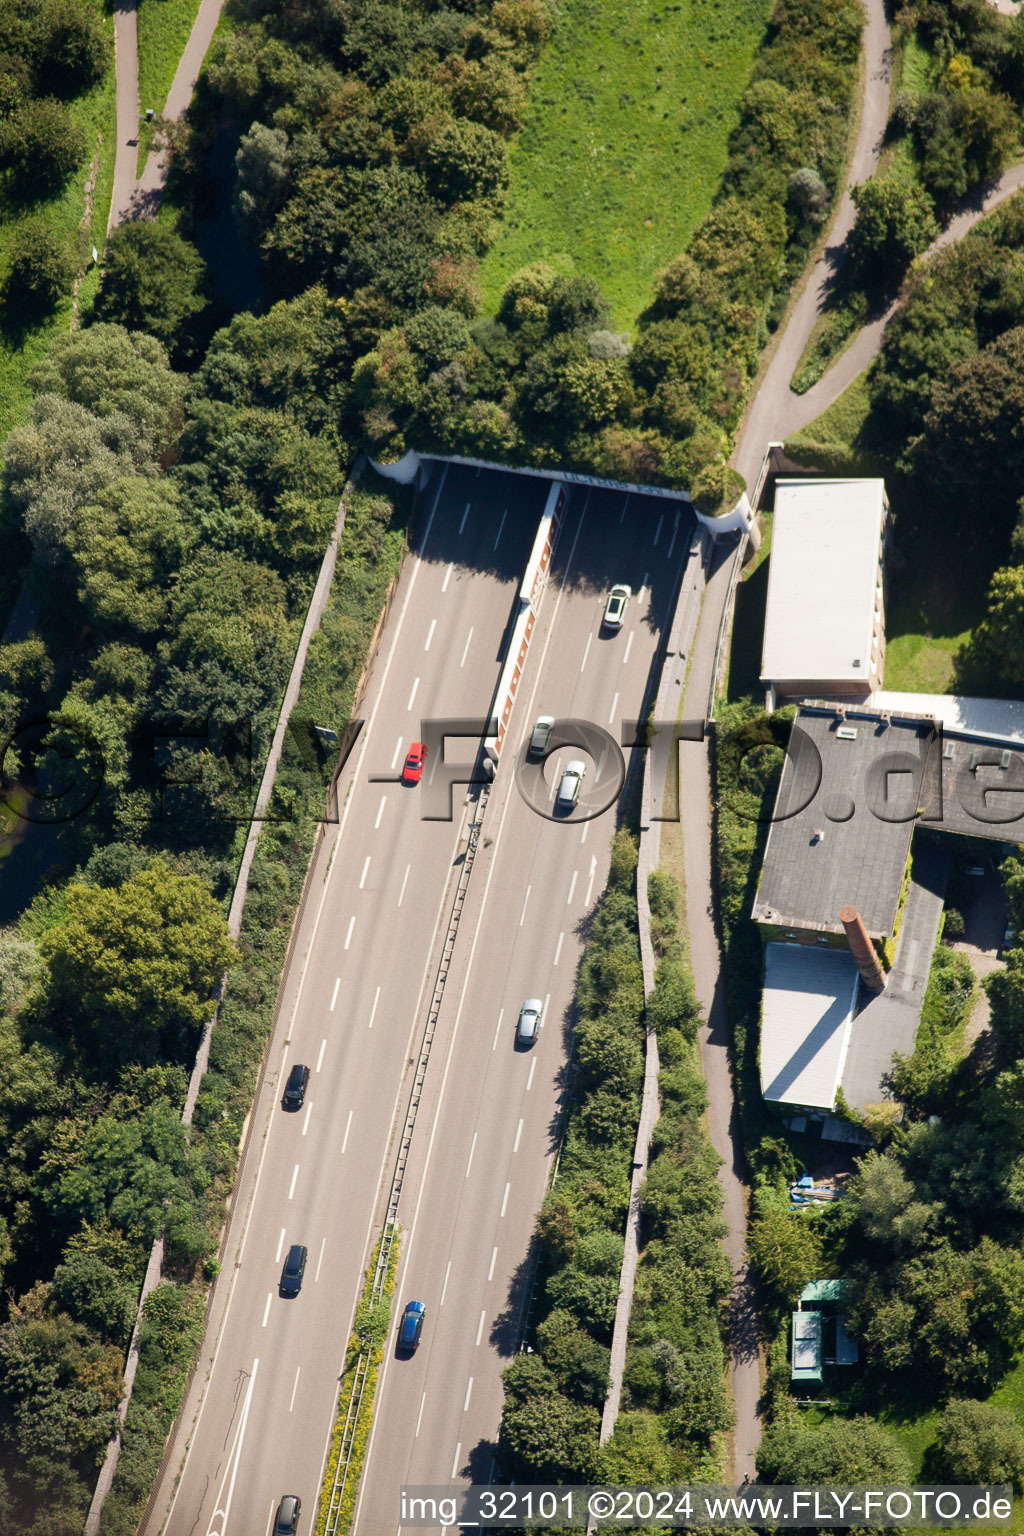 Entry and exit area of Edeltrud Tunnel in the district Beiertheim - Bulach in Karlsruhe in the state Baden-Wurttemberg from the drone perspective